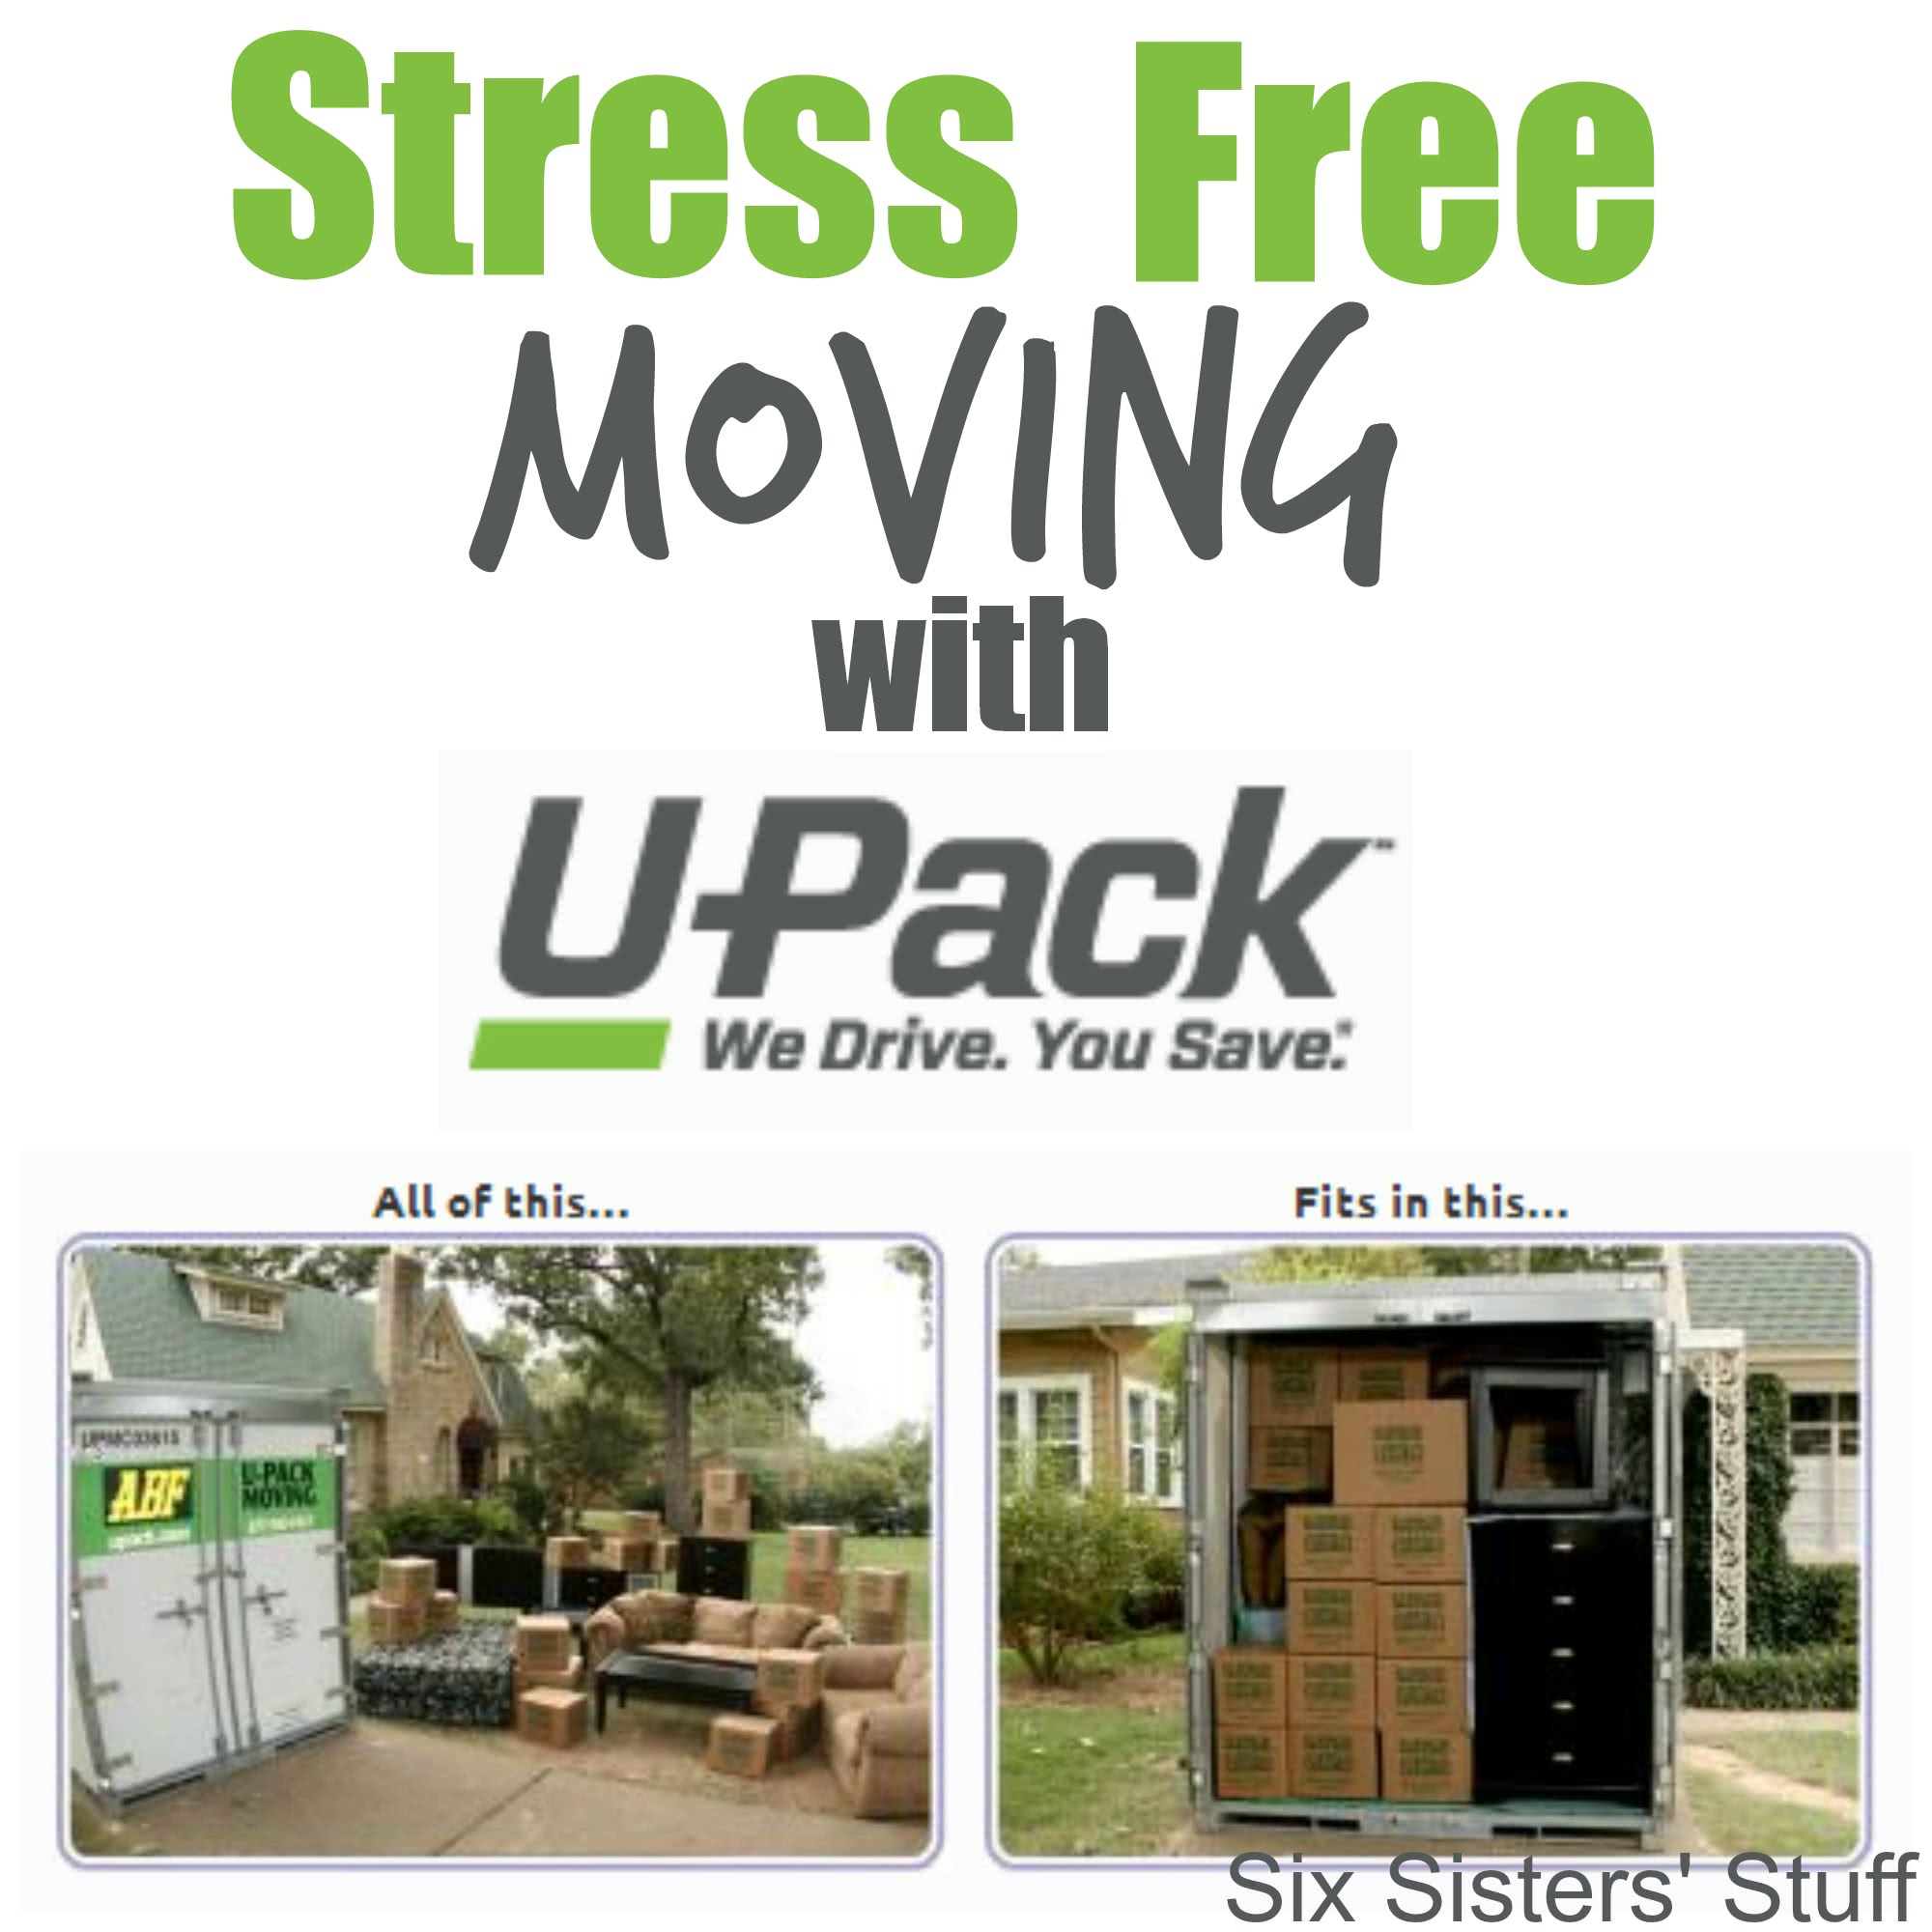 Stress Free Moving With U-Pack